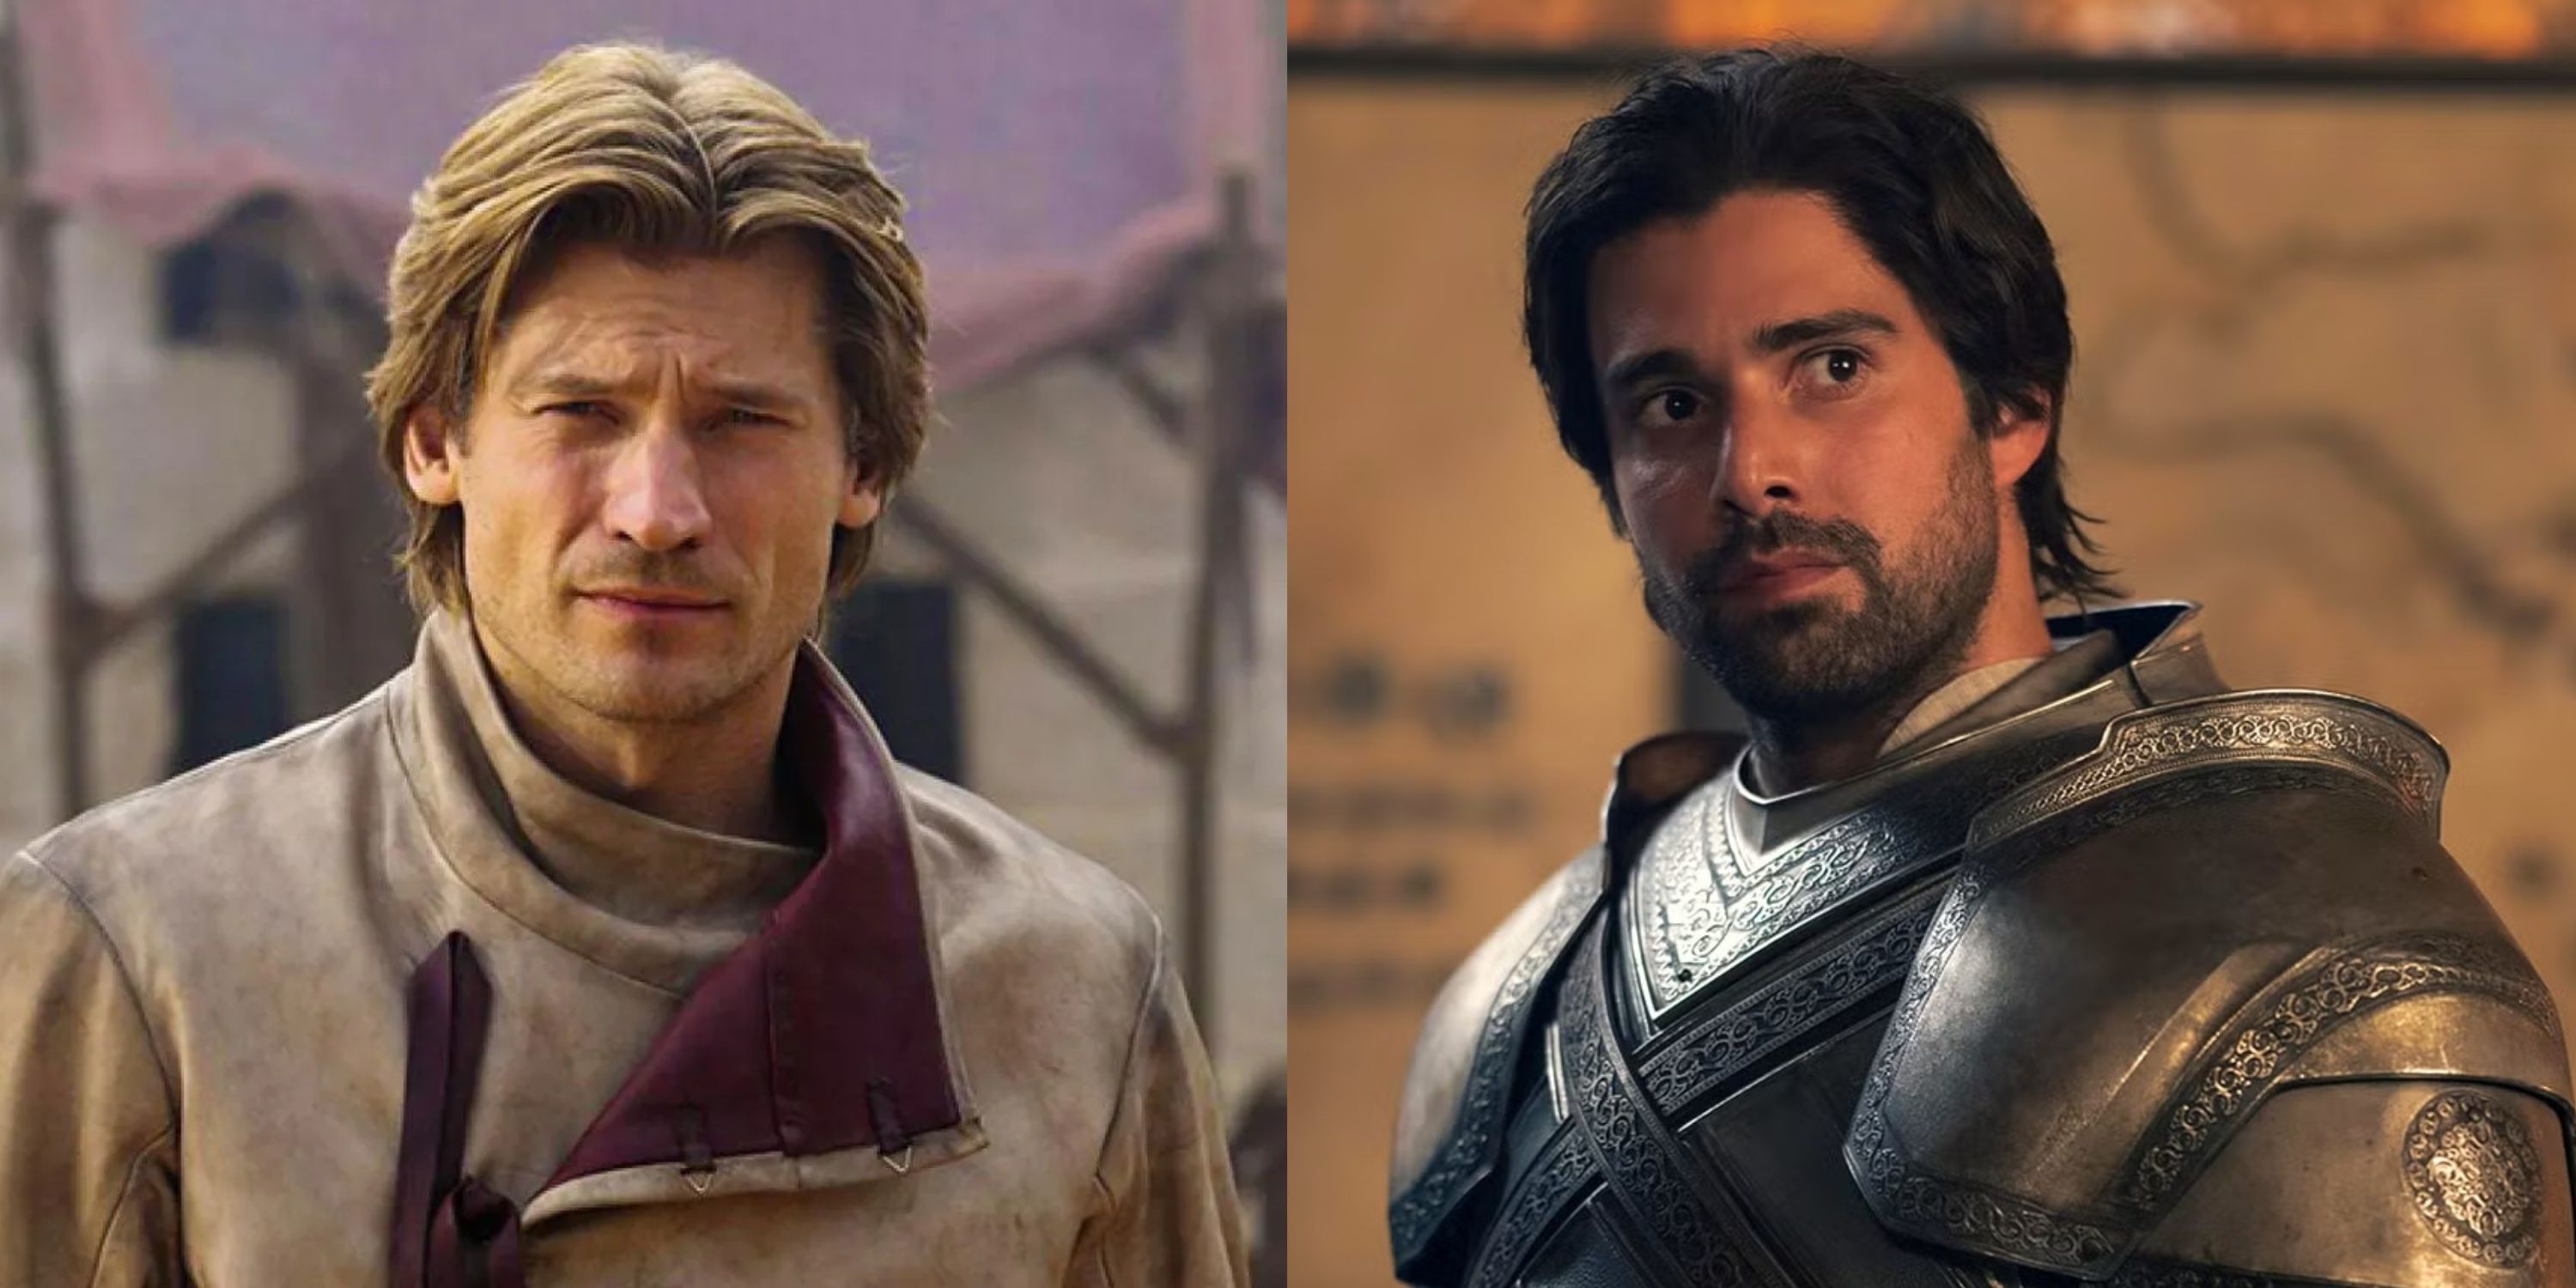 Jaime Lannister and Criston Cole from Game of Thrones and House of the Dragon respectively